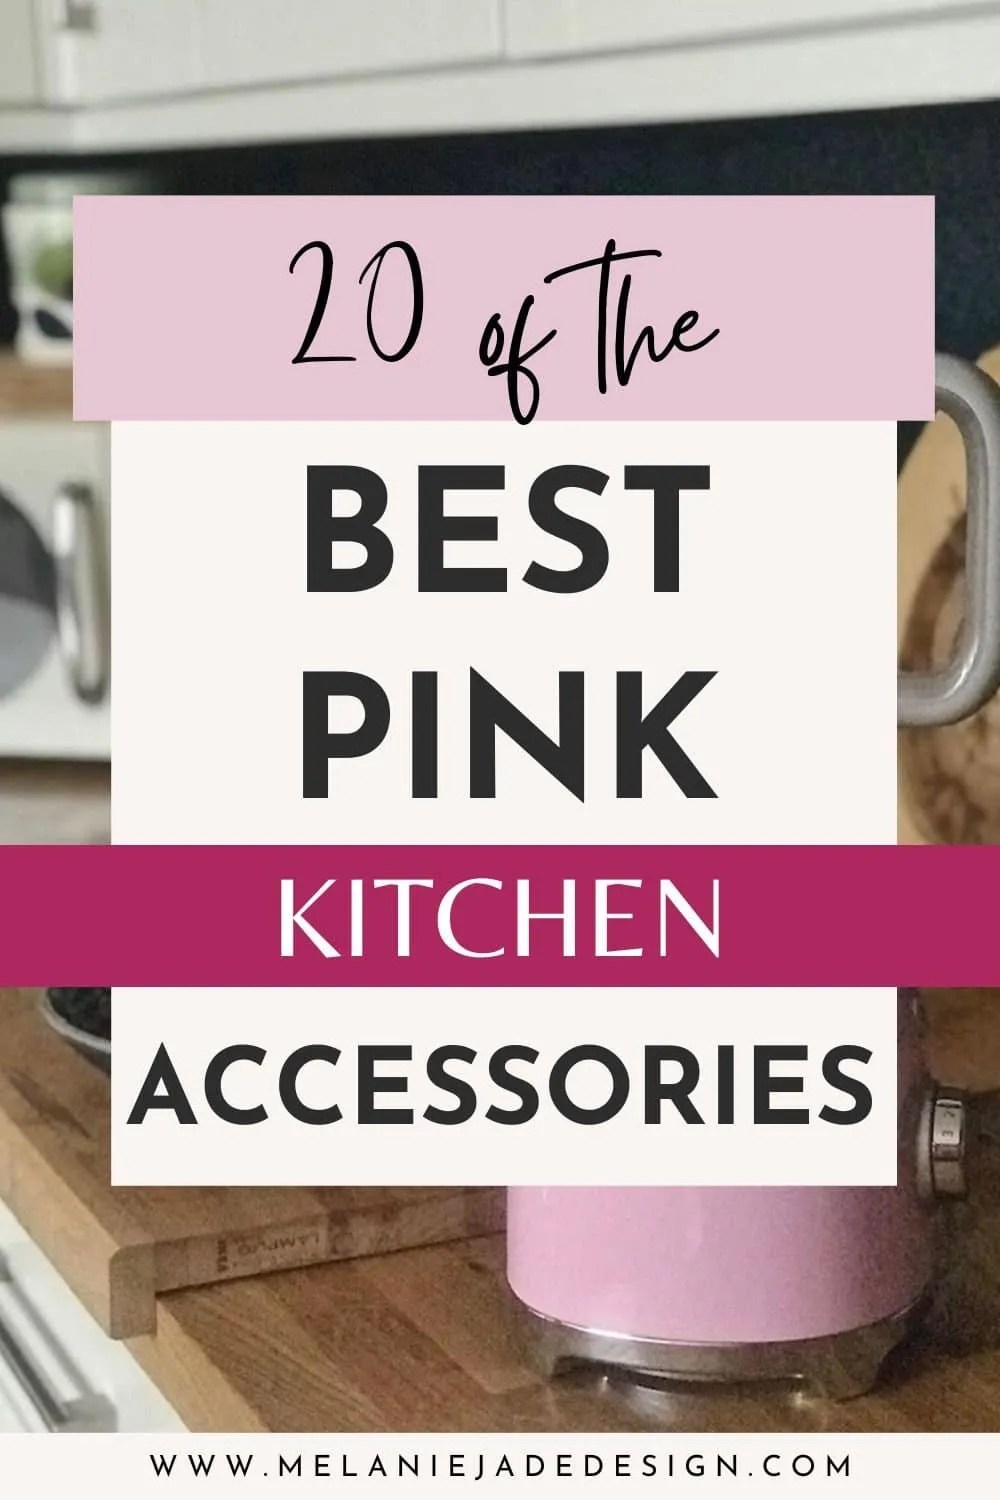 20 of the best pink kitchen accessories pinterest pin